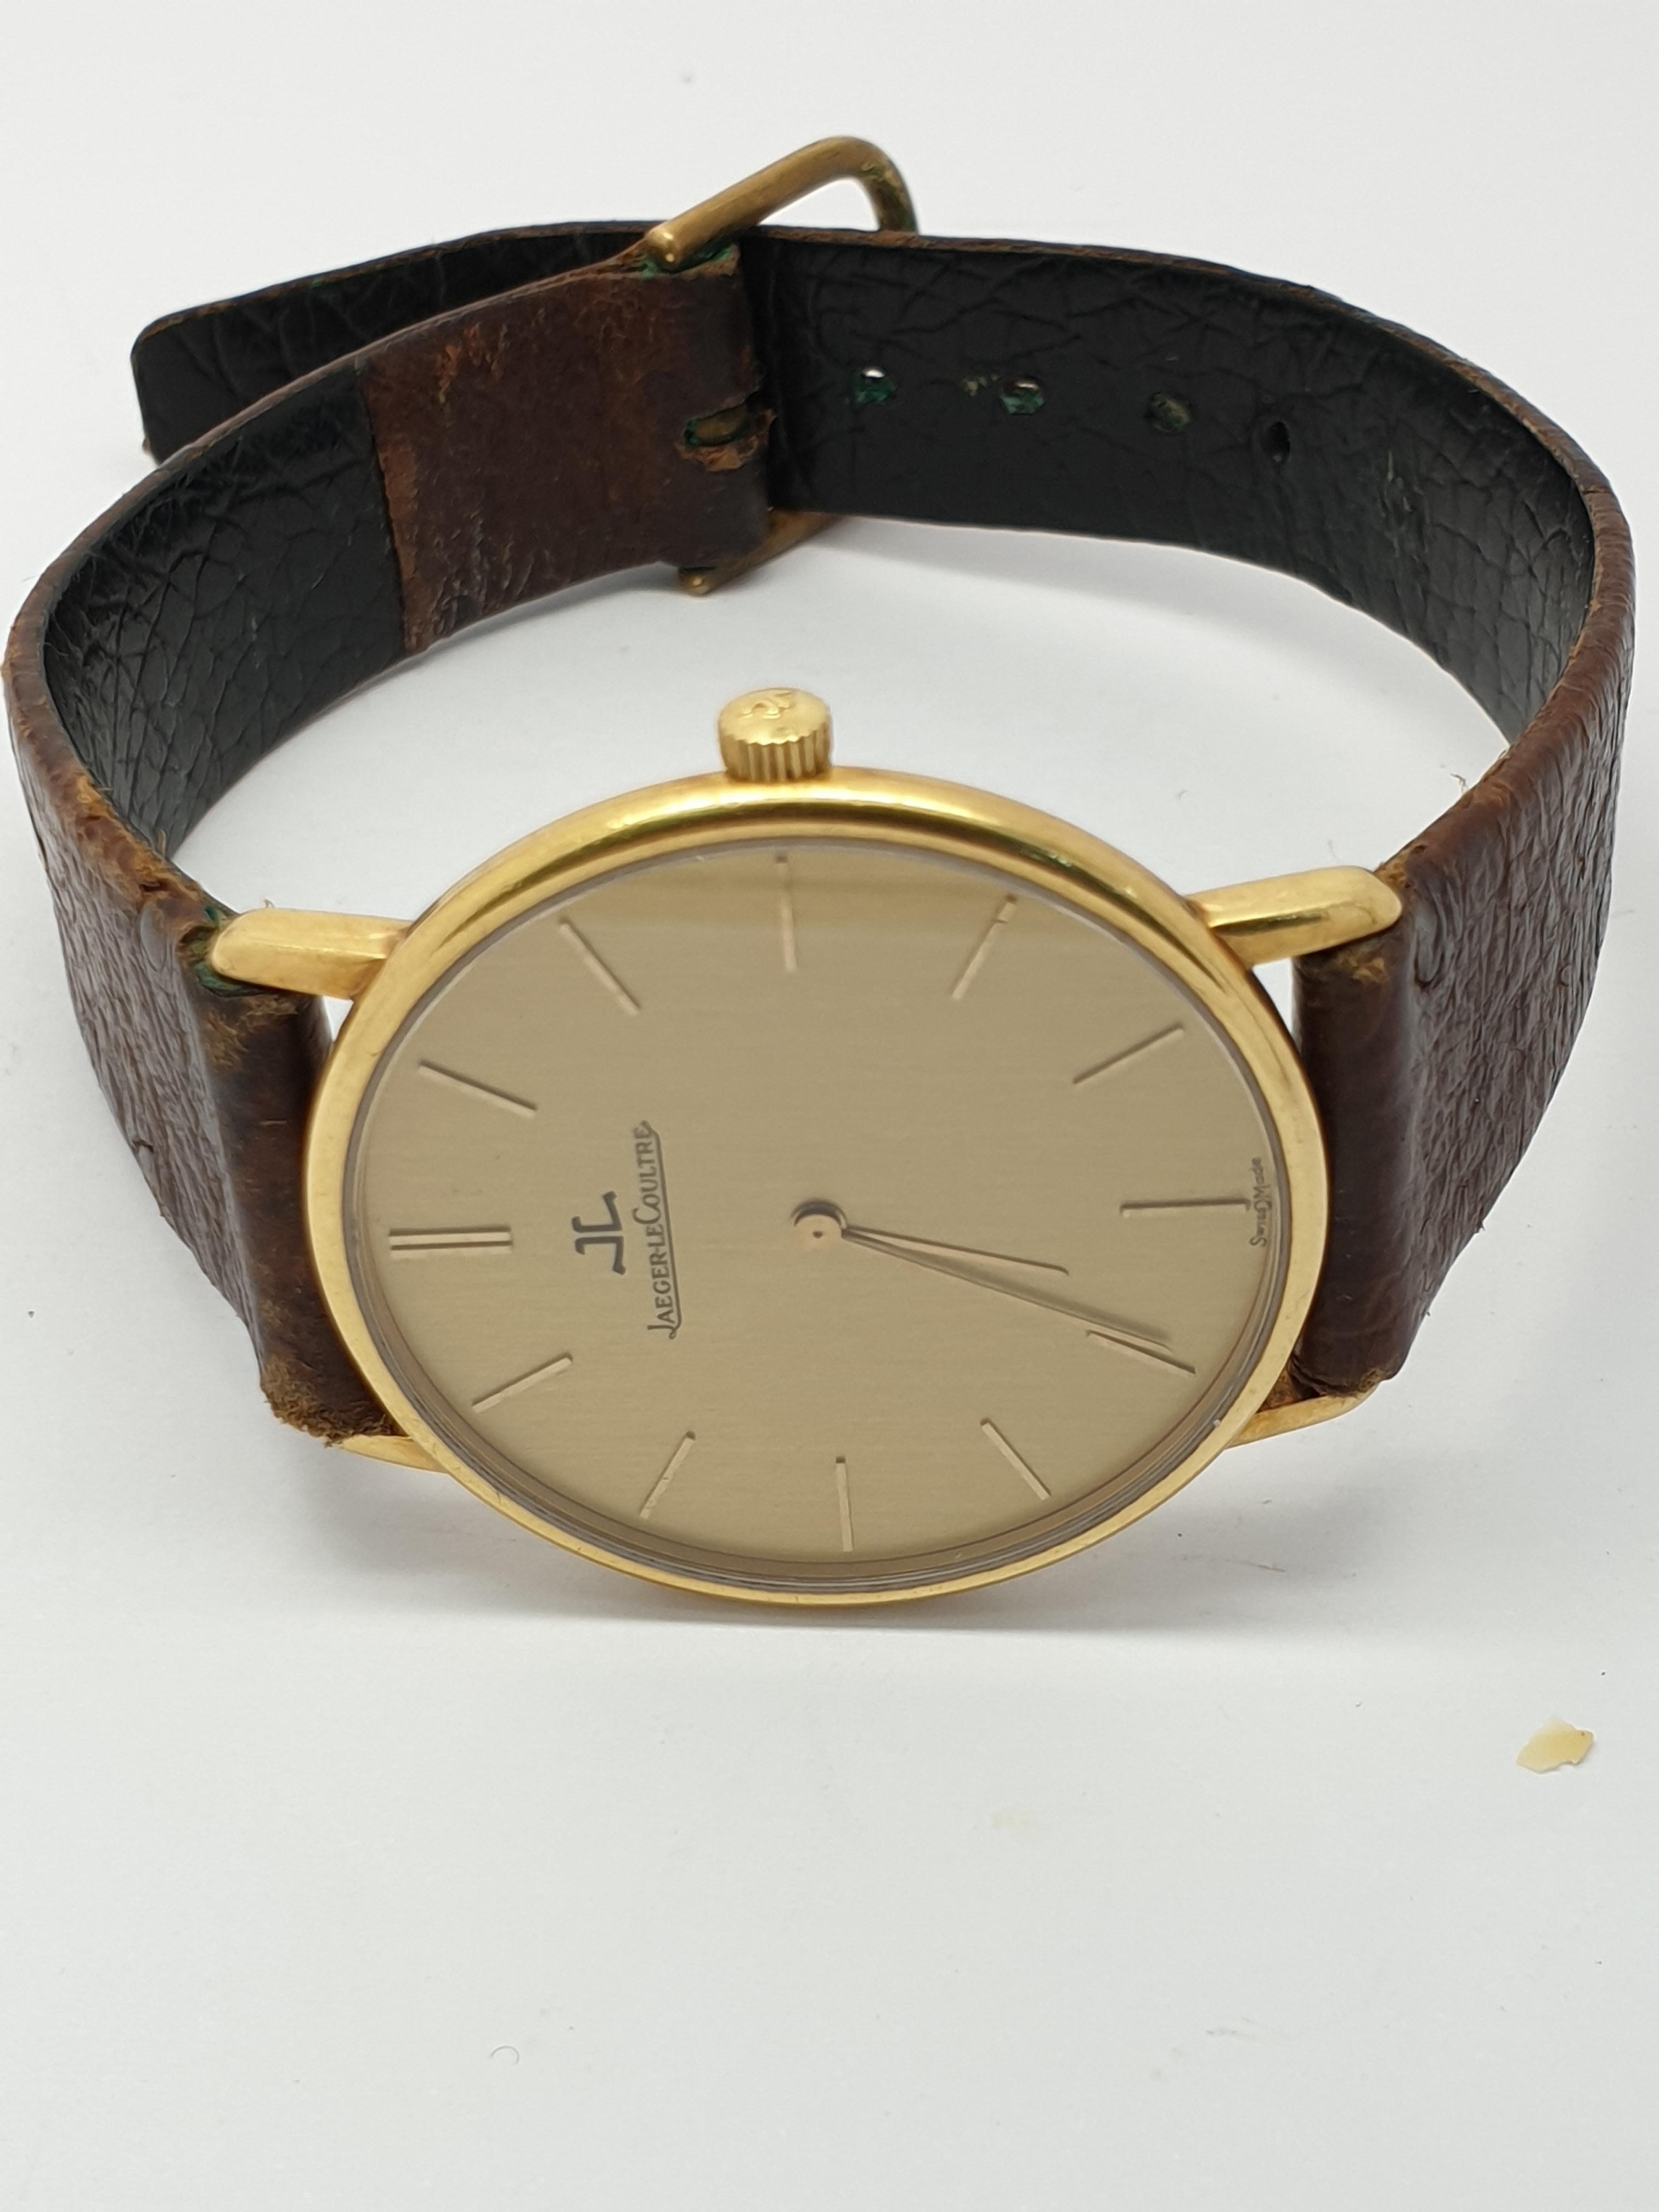 Vintage 18 kt yellow  gold Jaeger LeCoultre  watch on leather strap. The model equipped with JLC quartz  movement which is in good working order.  As a vintage piece has mineral glass . Case is 18 kt  yellow gold. The timepiece  diameter is 35